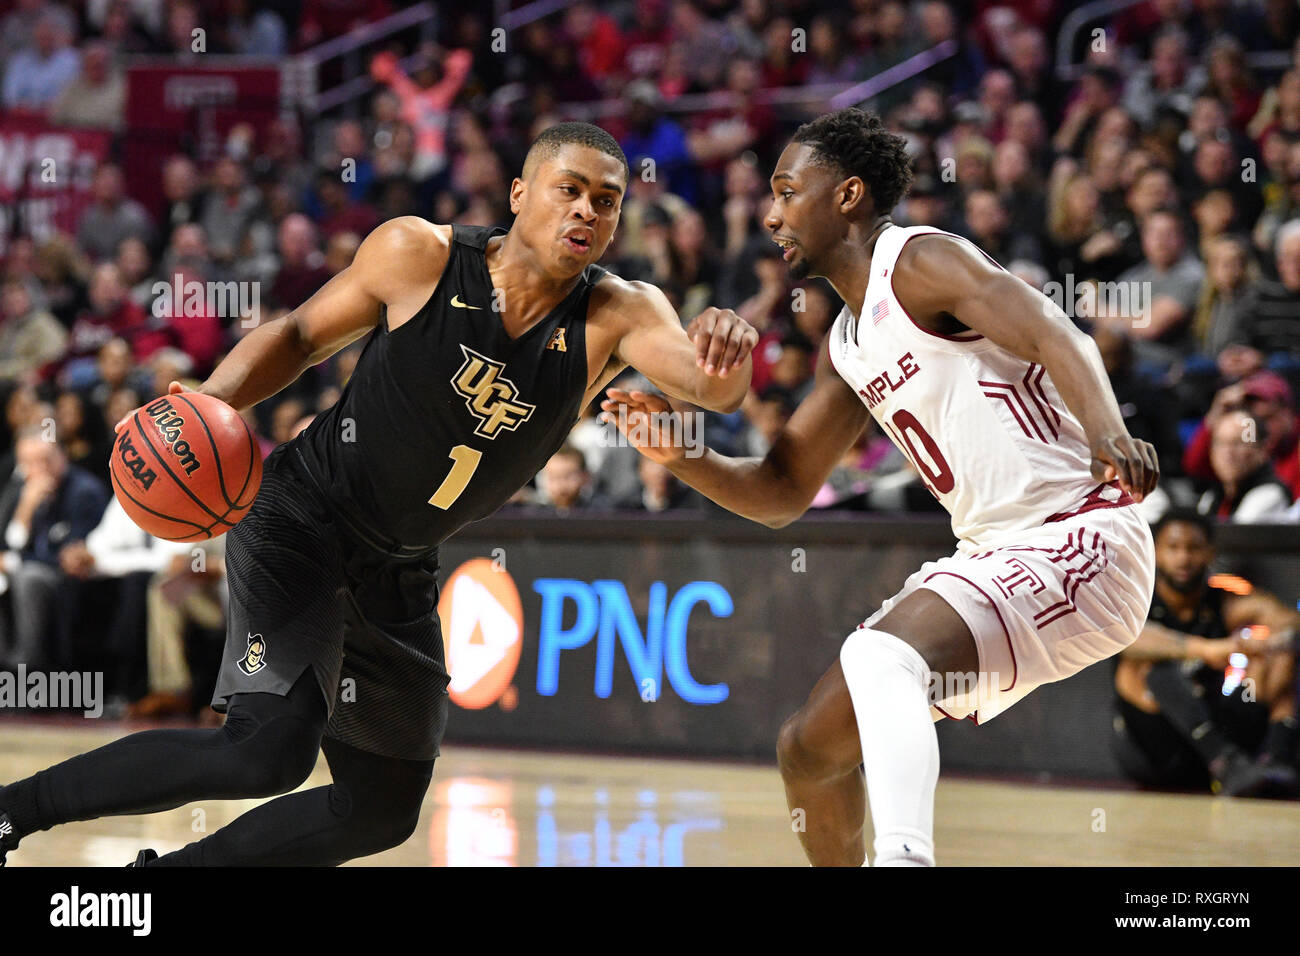 Philadelphia, Pennsylvania, USA. 9th Mar, 2019. UCF Knights guard B.J. TAYLOR (1) tries to drive by Temple Owls guard SHIZZ ALSTON JR. (10) during the American Athletic Conference basketball game played at the Liacouras Center in Philadelphia. Temple beat #25 UCF 67-62. Credit: Ken Inness/ZUMA Wire/Alamy Live News Stock Photo